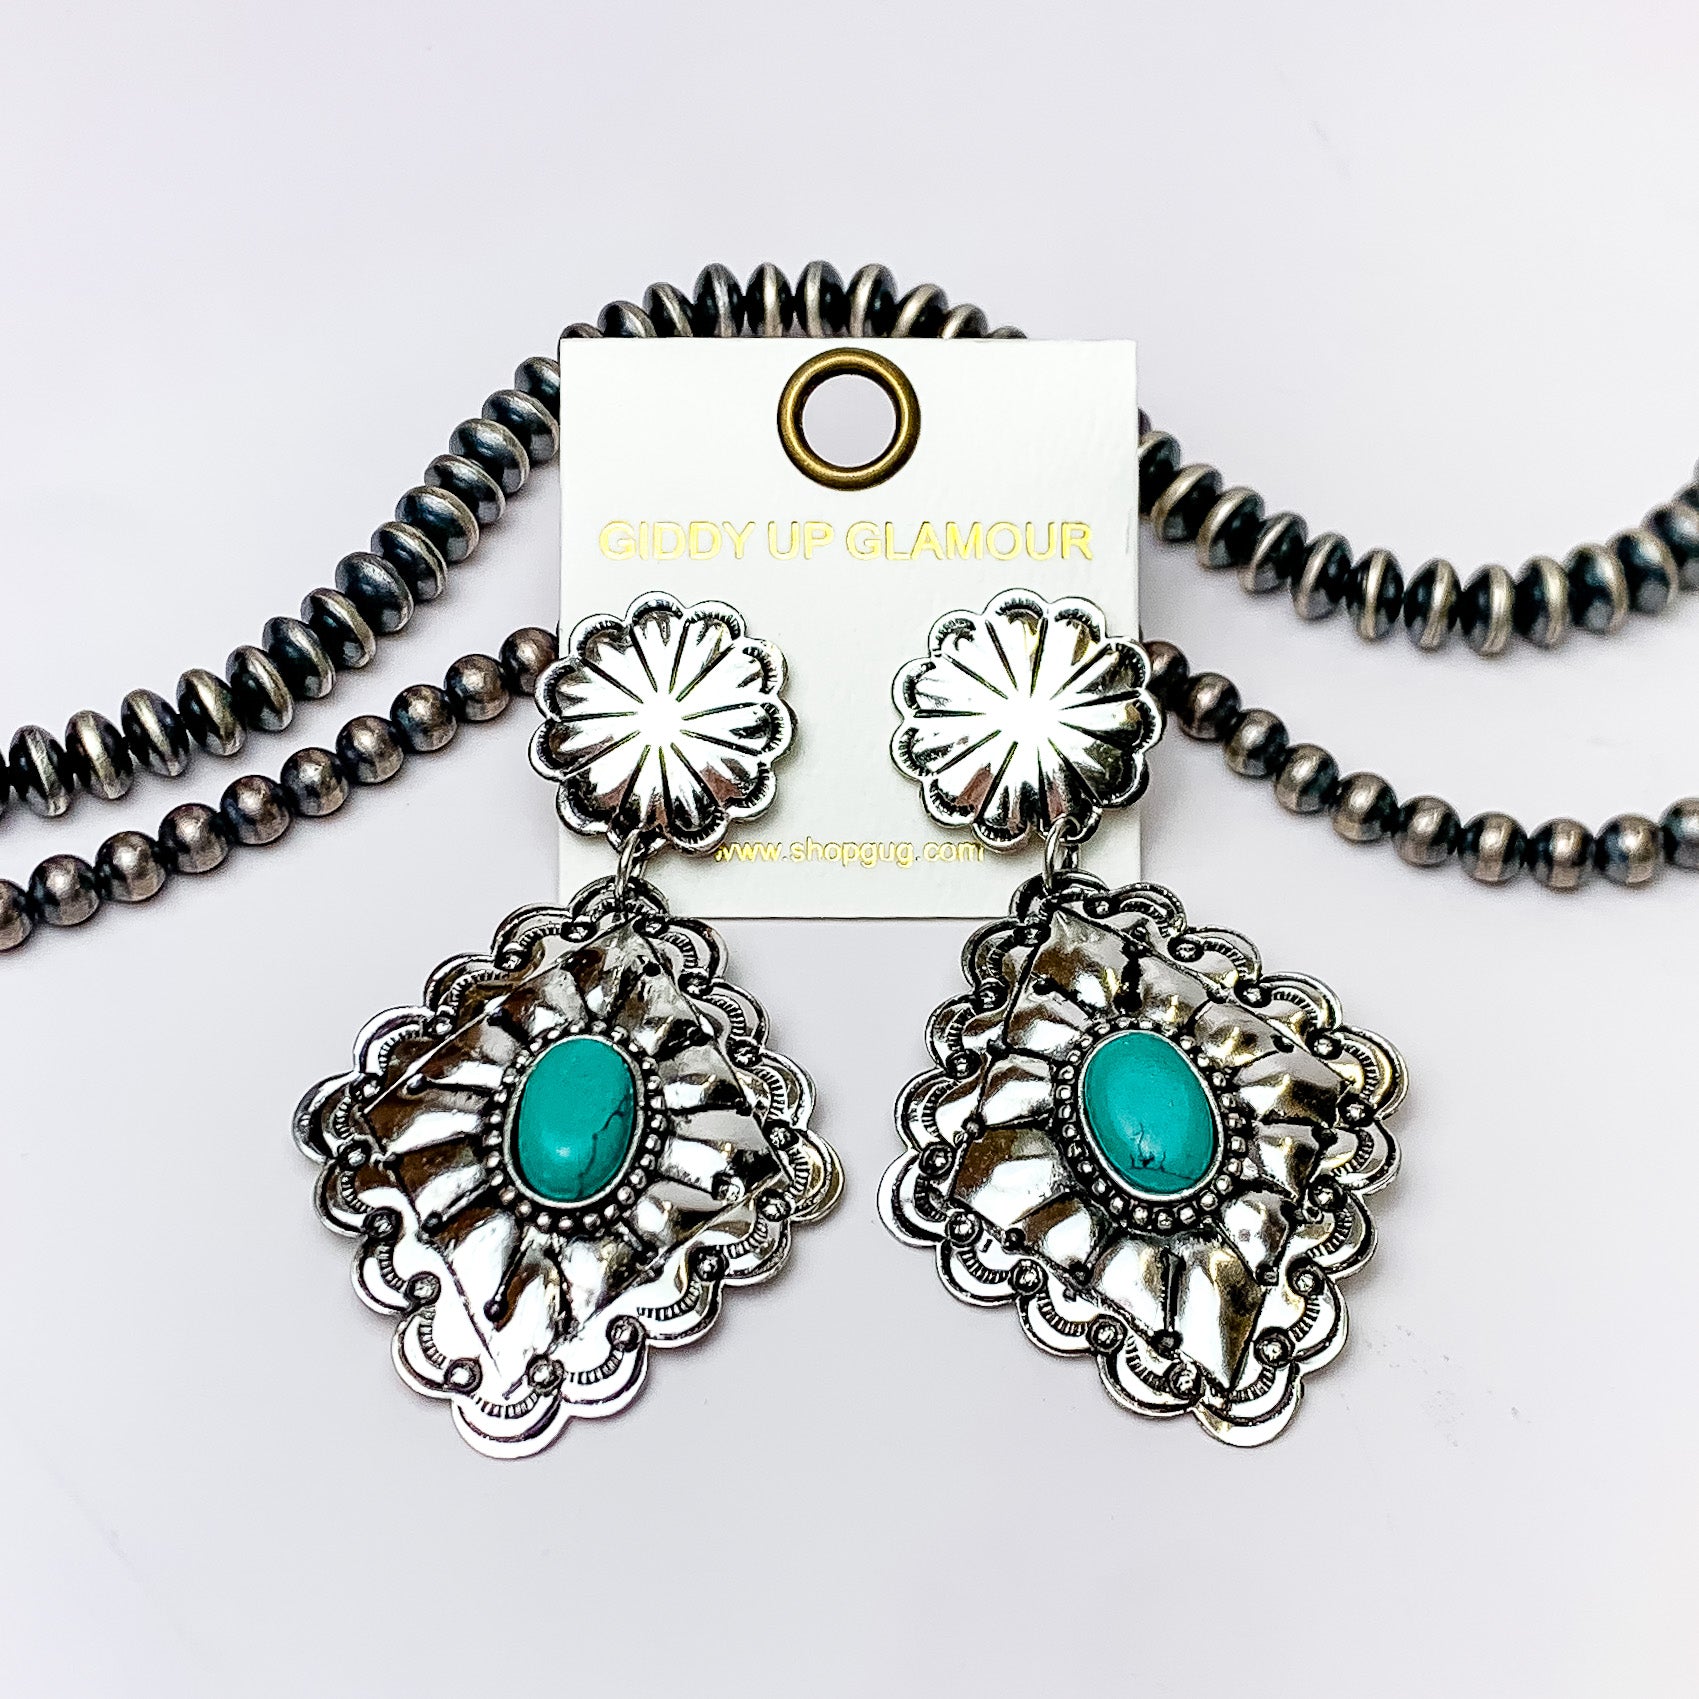 Silver circle post back earrings with a diamond concho drop and center turquoise stone. These earrings are pictured on a white background with silver beads at the top of the picture. 